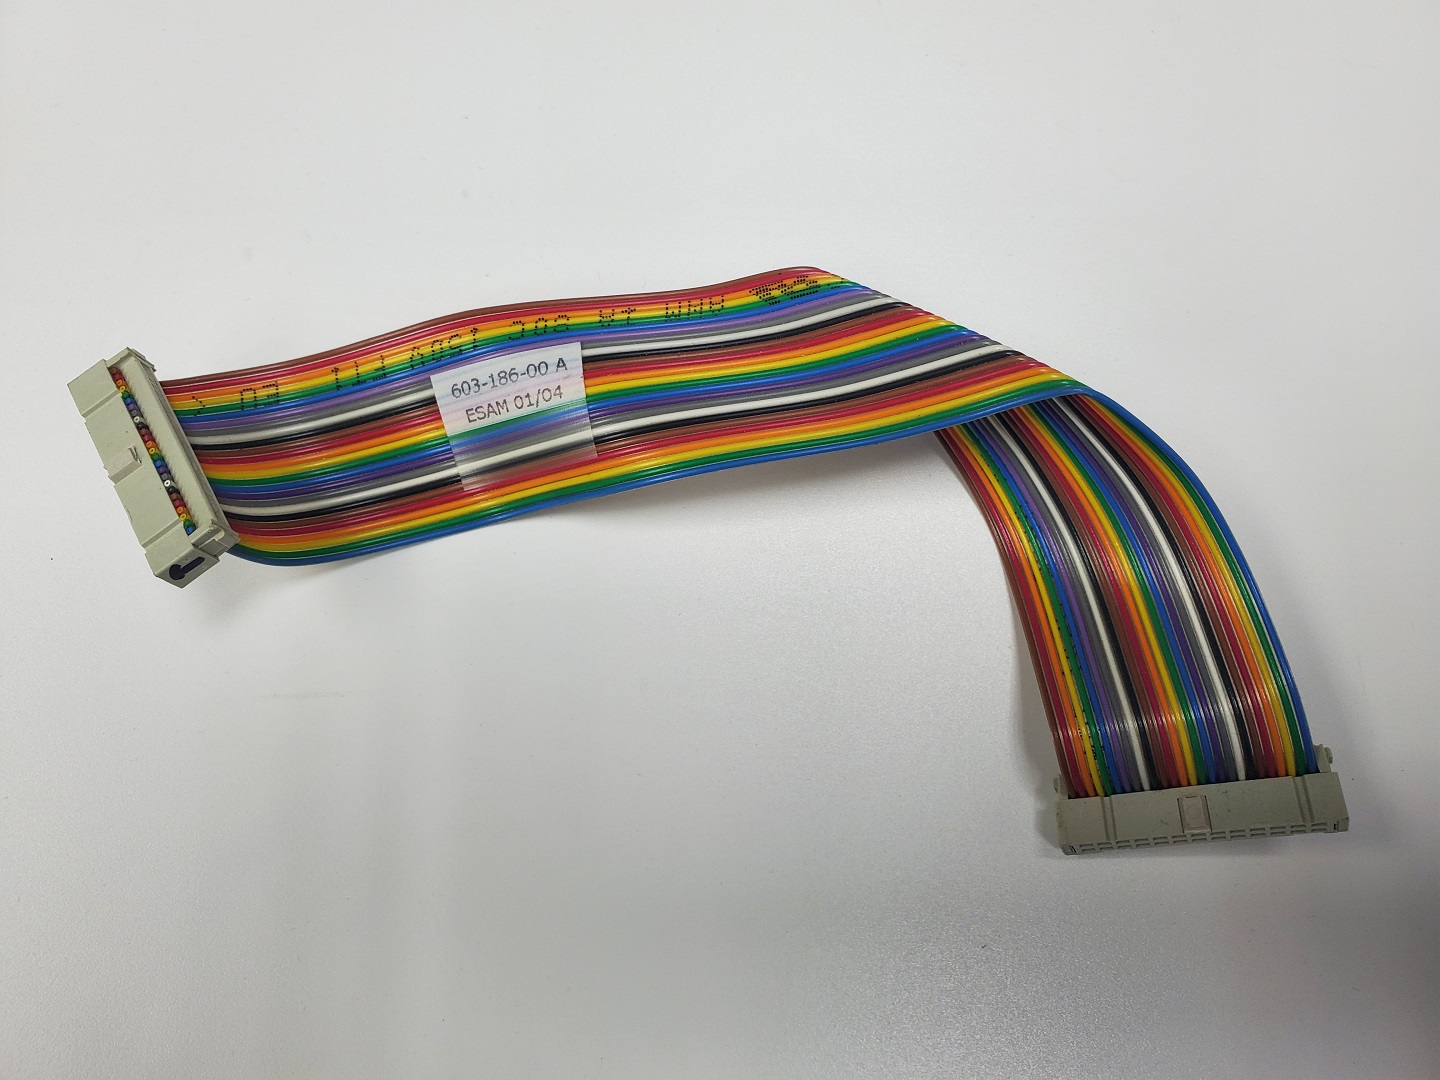 http://www.gamblersoasisusa.com/Shared/Images/Product/IGT-603-186-00-A-RIBBON-CABLE-FOR-S2000-SLOT-MACHINE/IGT-603-186-00-A-RIBBON-CABLE.jpg